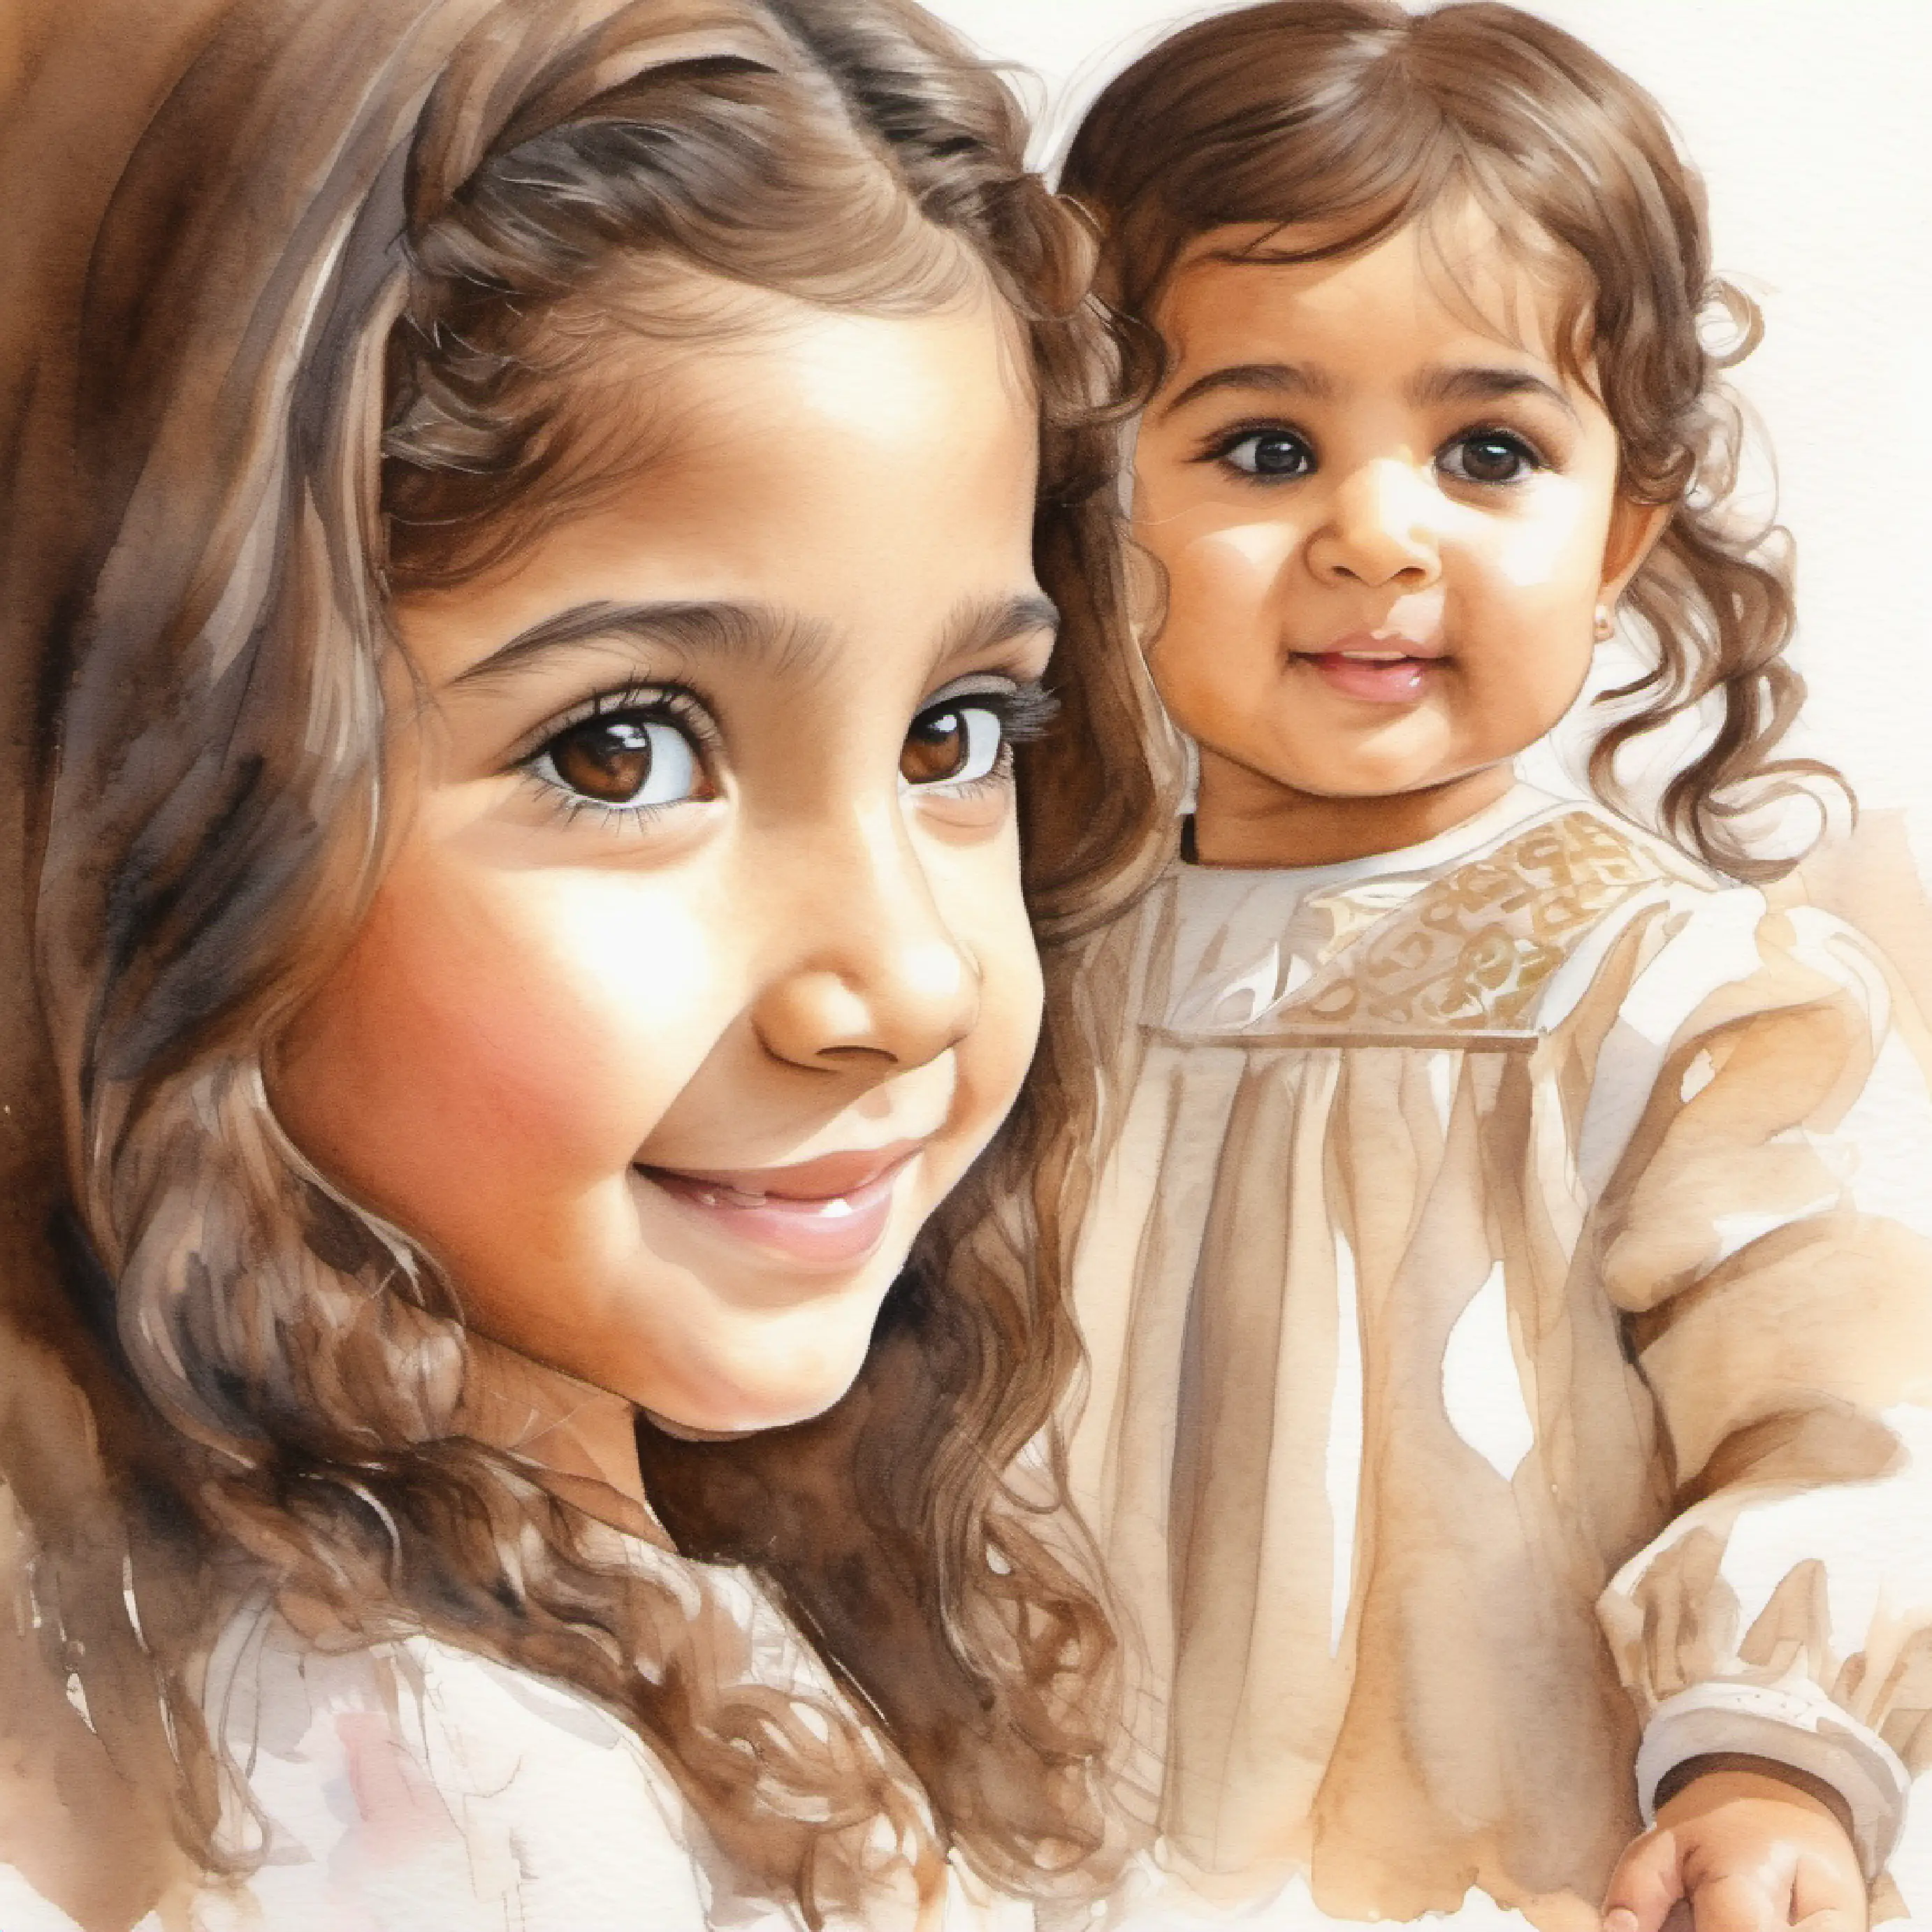 Little sister Maha (17-month-old) gives Reem a gift